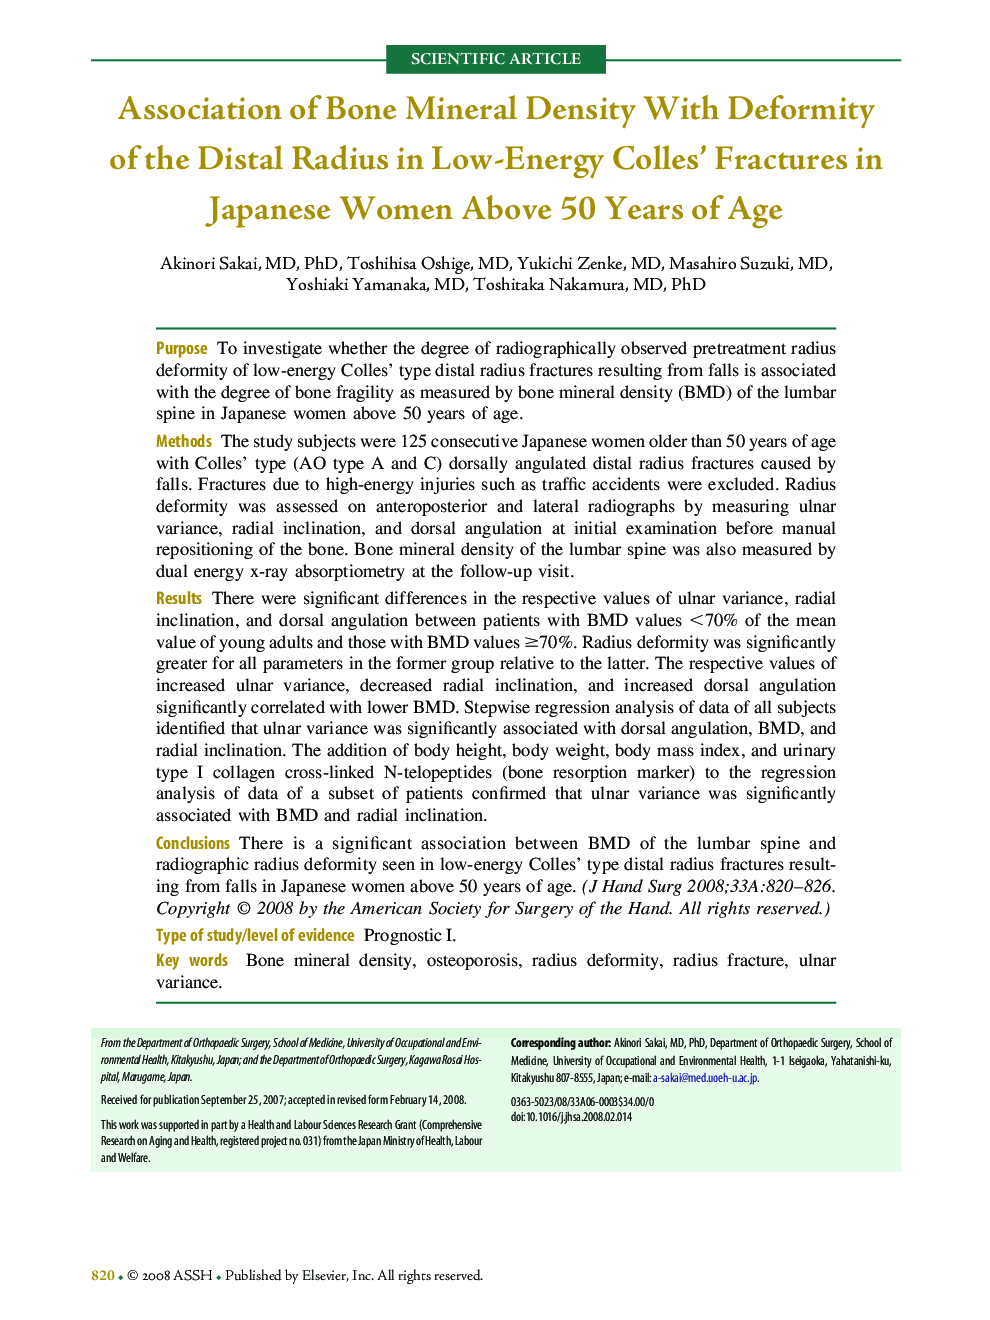 Association of Bone Mineral Density With Deformity of the Distal Radius in Low-Energy Colles' Fractures in Japanese Women Above 50 Years of Age 